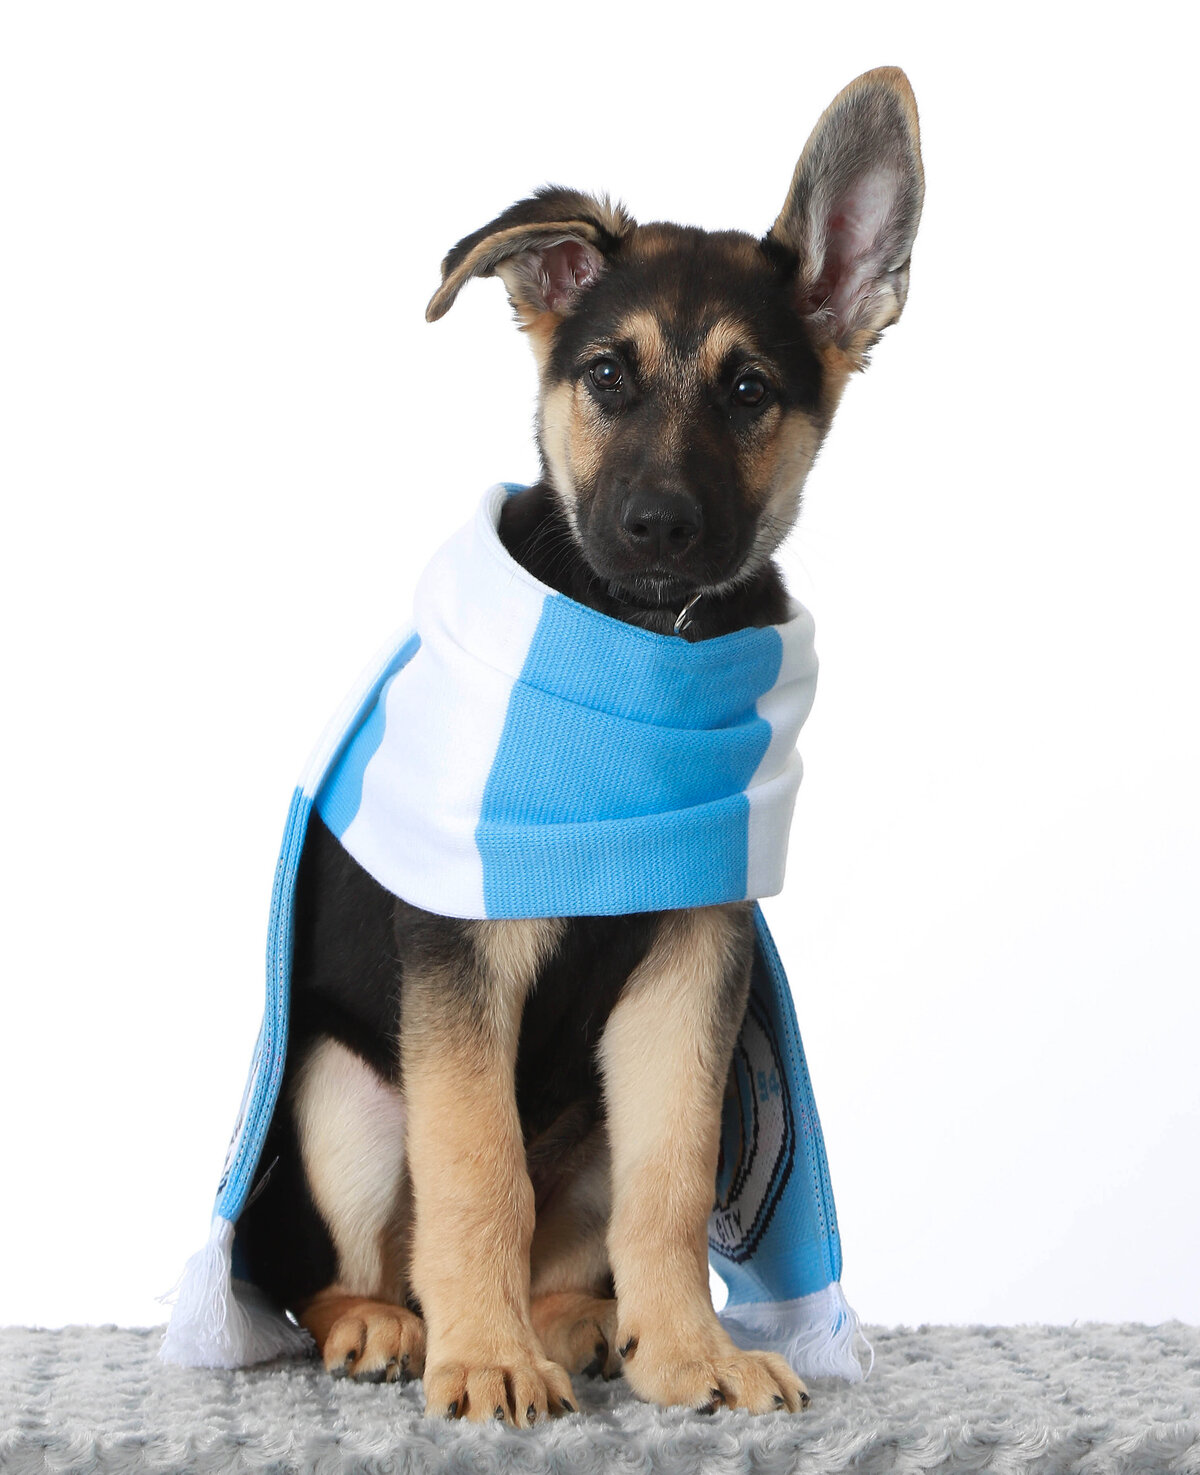 Adorable German Shephard puppy with one ear that sticks straight up and  the other lays down. and he's wearing a scarf.